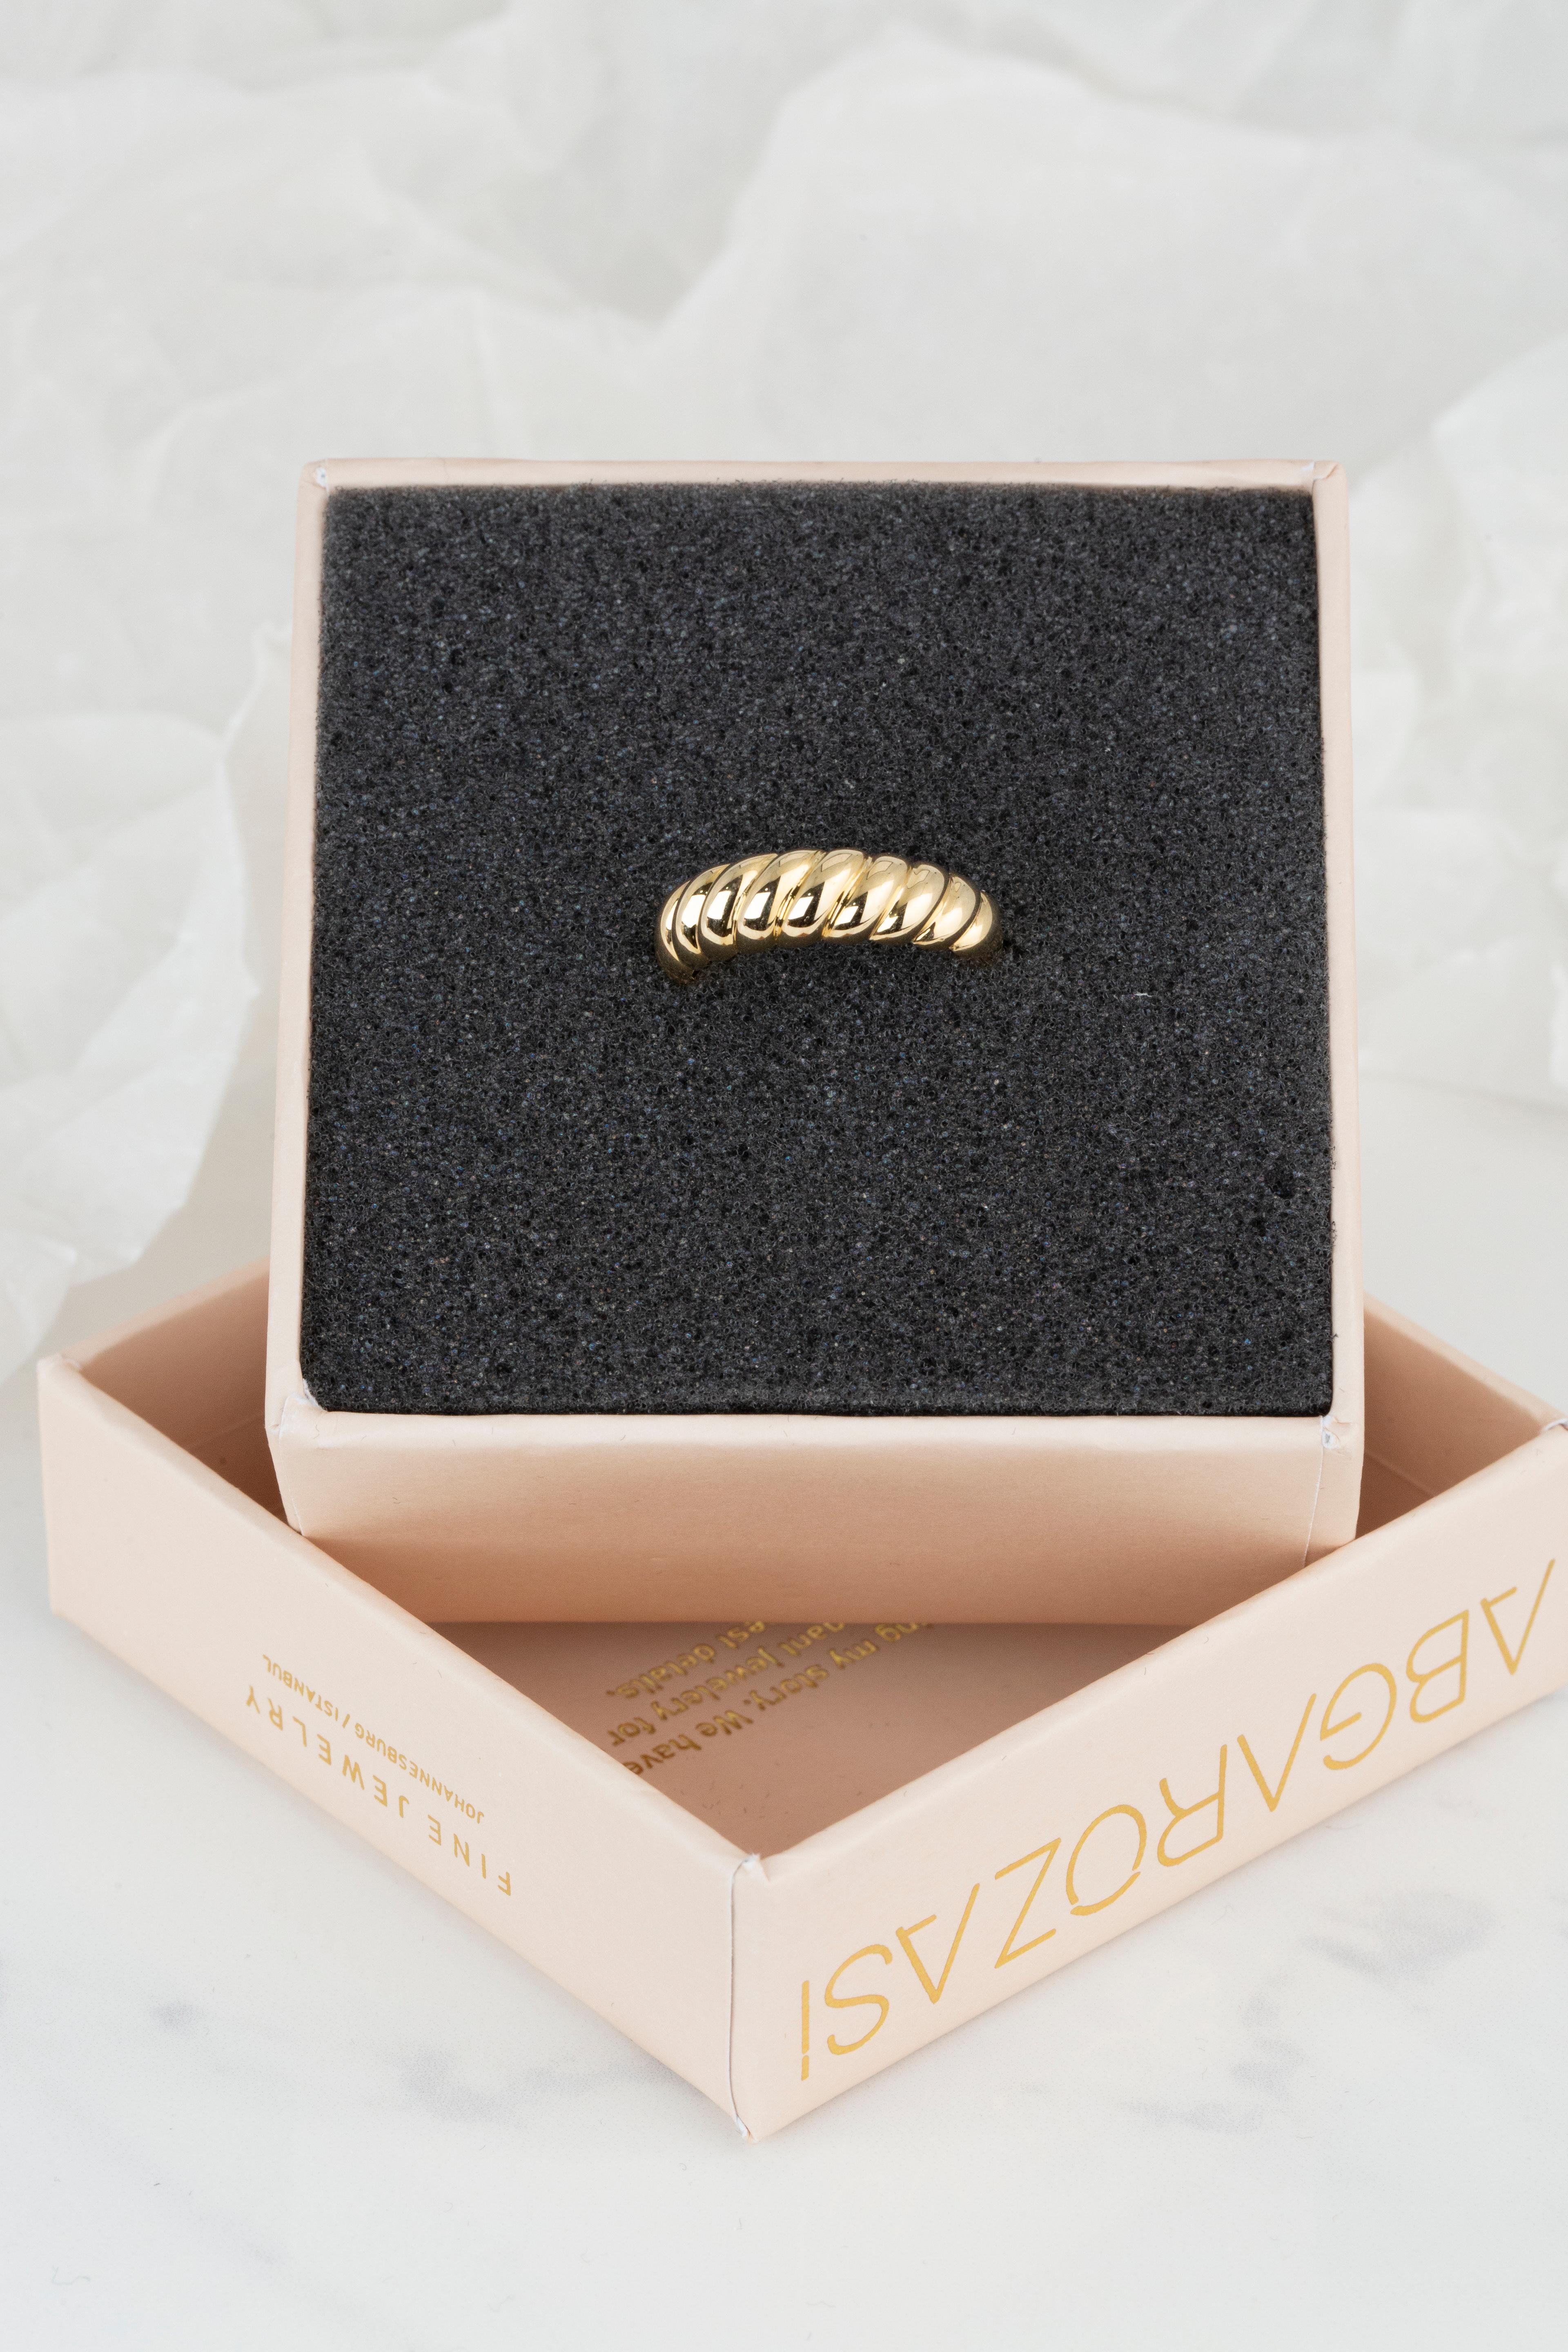 For Sale:  Croissant Ring, Dome Croissant Ring, 14K Gold Croissant Ring 4